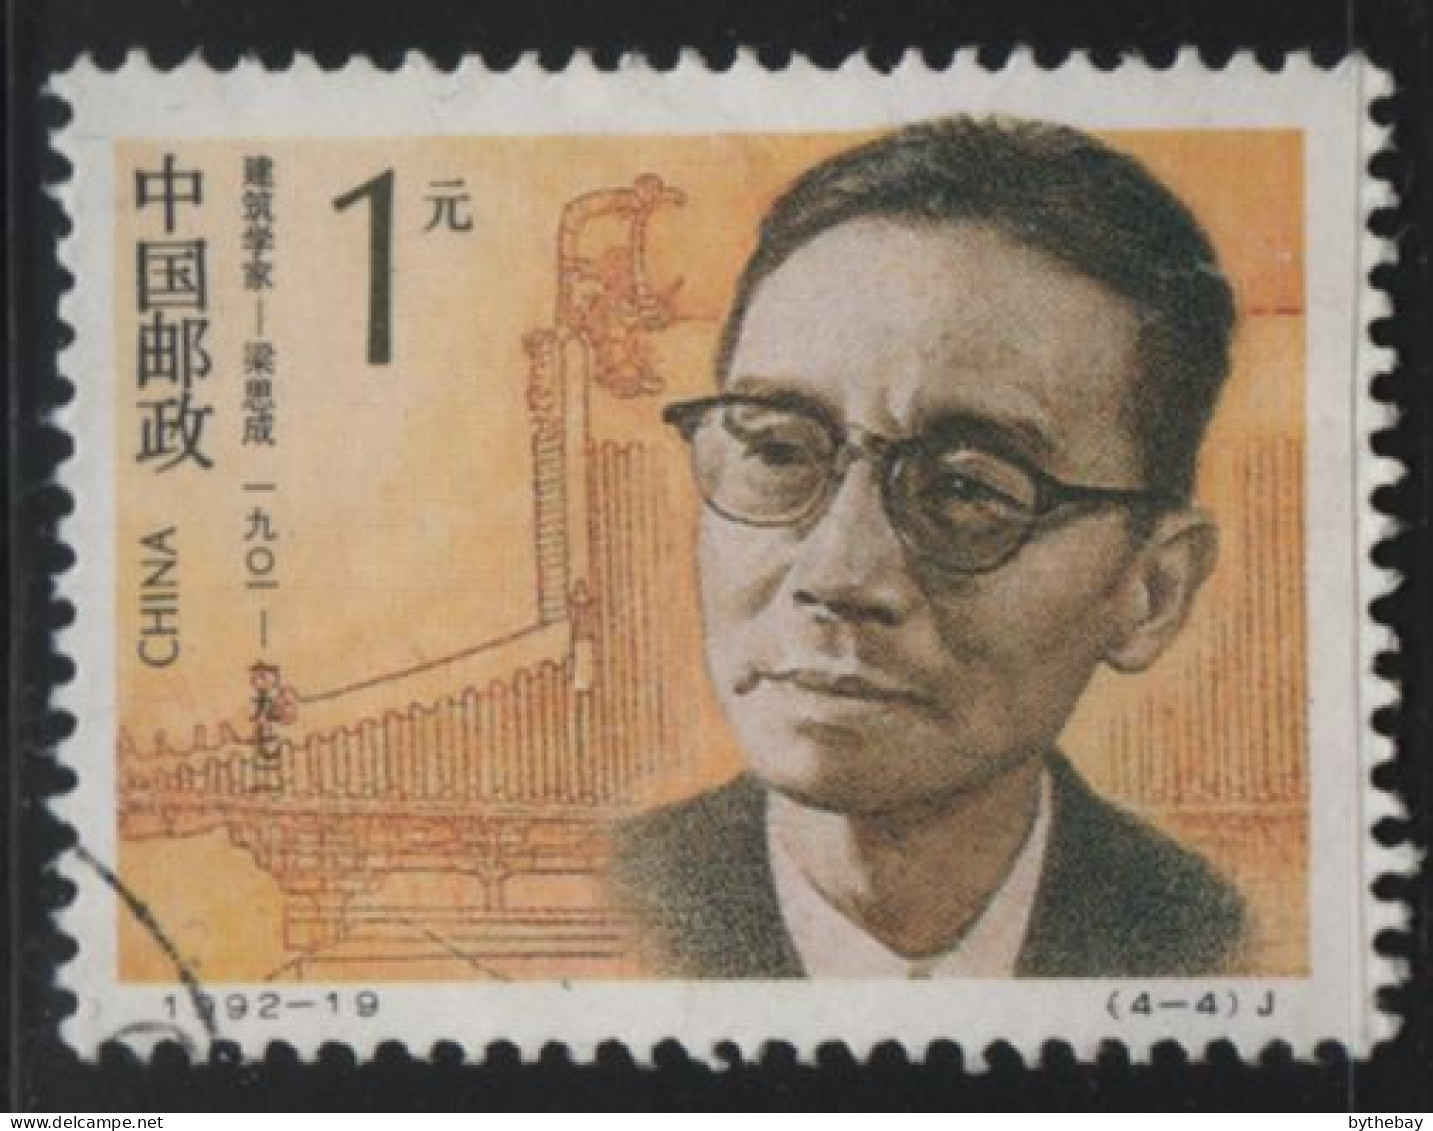 China People's Republic 1992 Used Sc 2419 $1 Liang Sicheng, Architect - Used Stamps